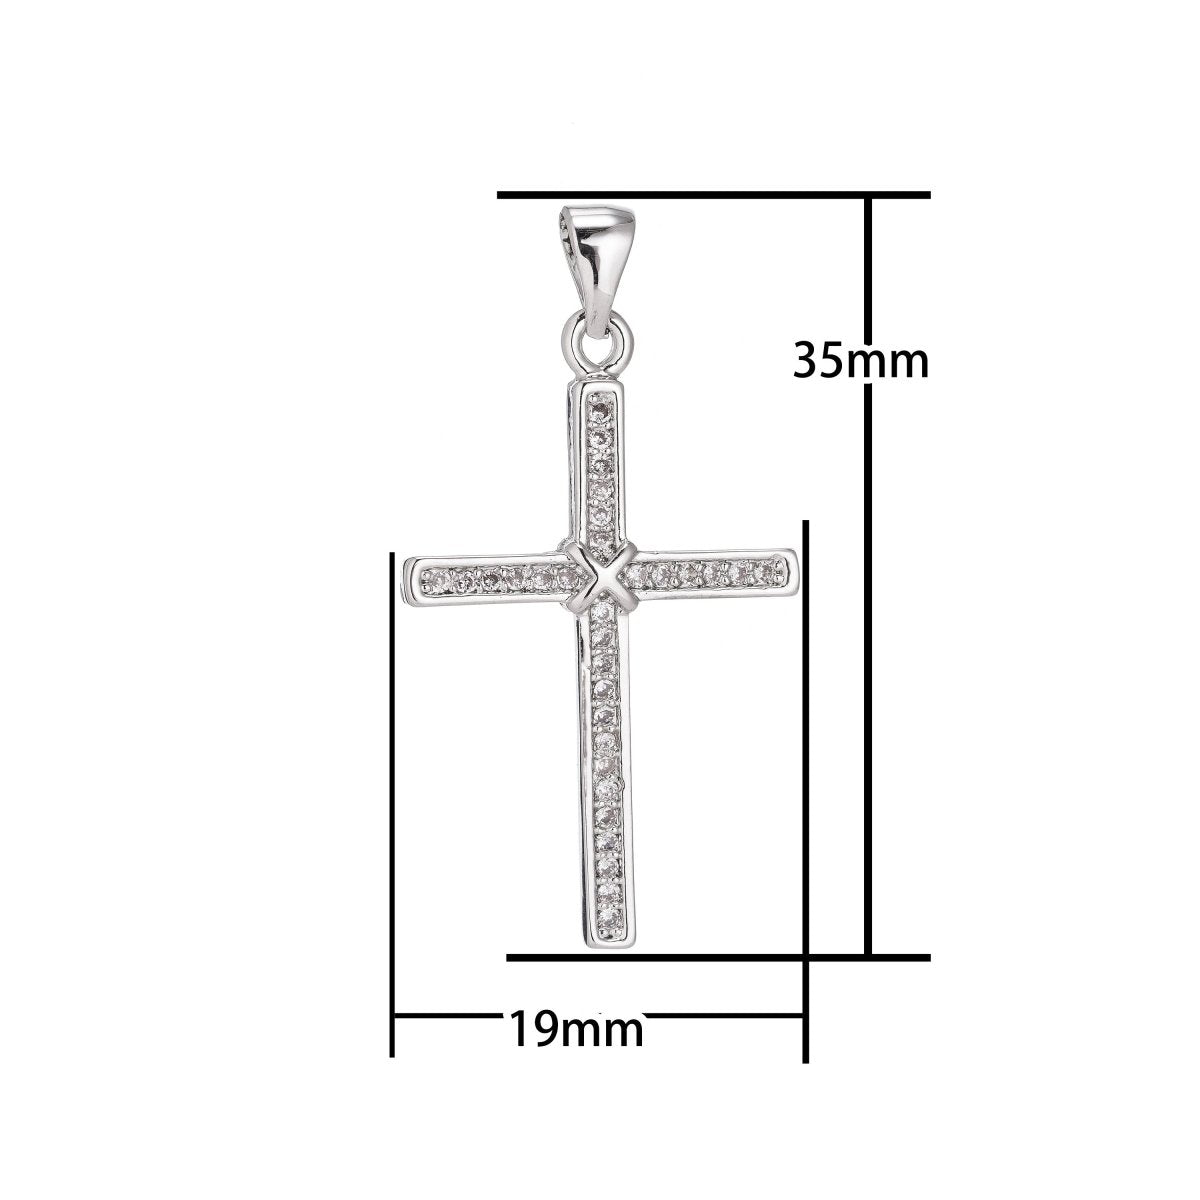 Rhodium White Gold Cross Pendant Cross Charm Necklace Pendant Micro Pave Cross Charm Findings for Jewelry Making, I-006 - DLUXCA